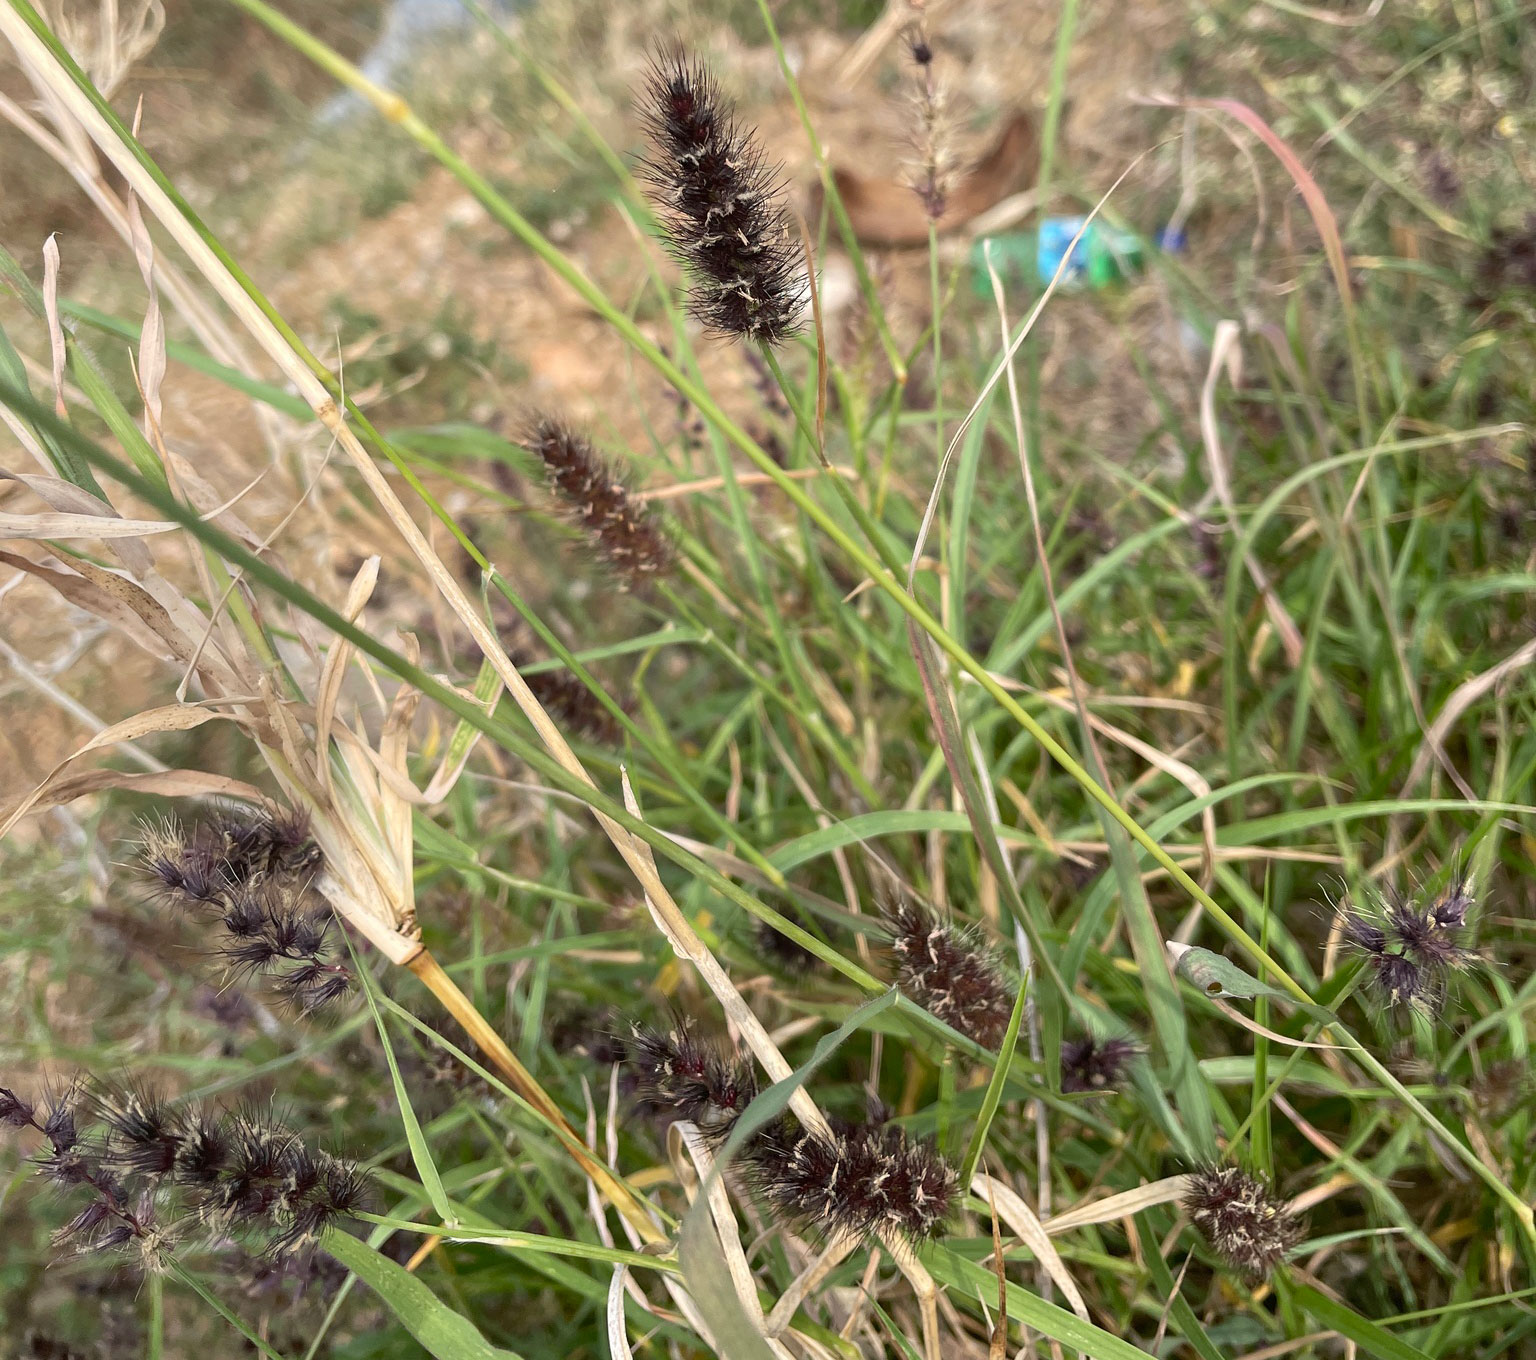 Photograph showing a detail of buffel grass. The photo shows a grass with bristly black inflorescences and white stamens.